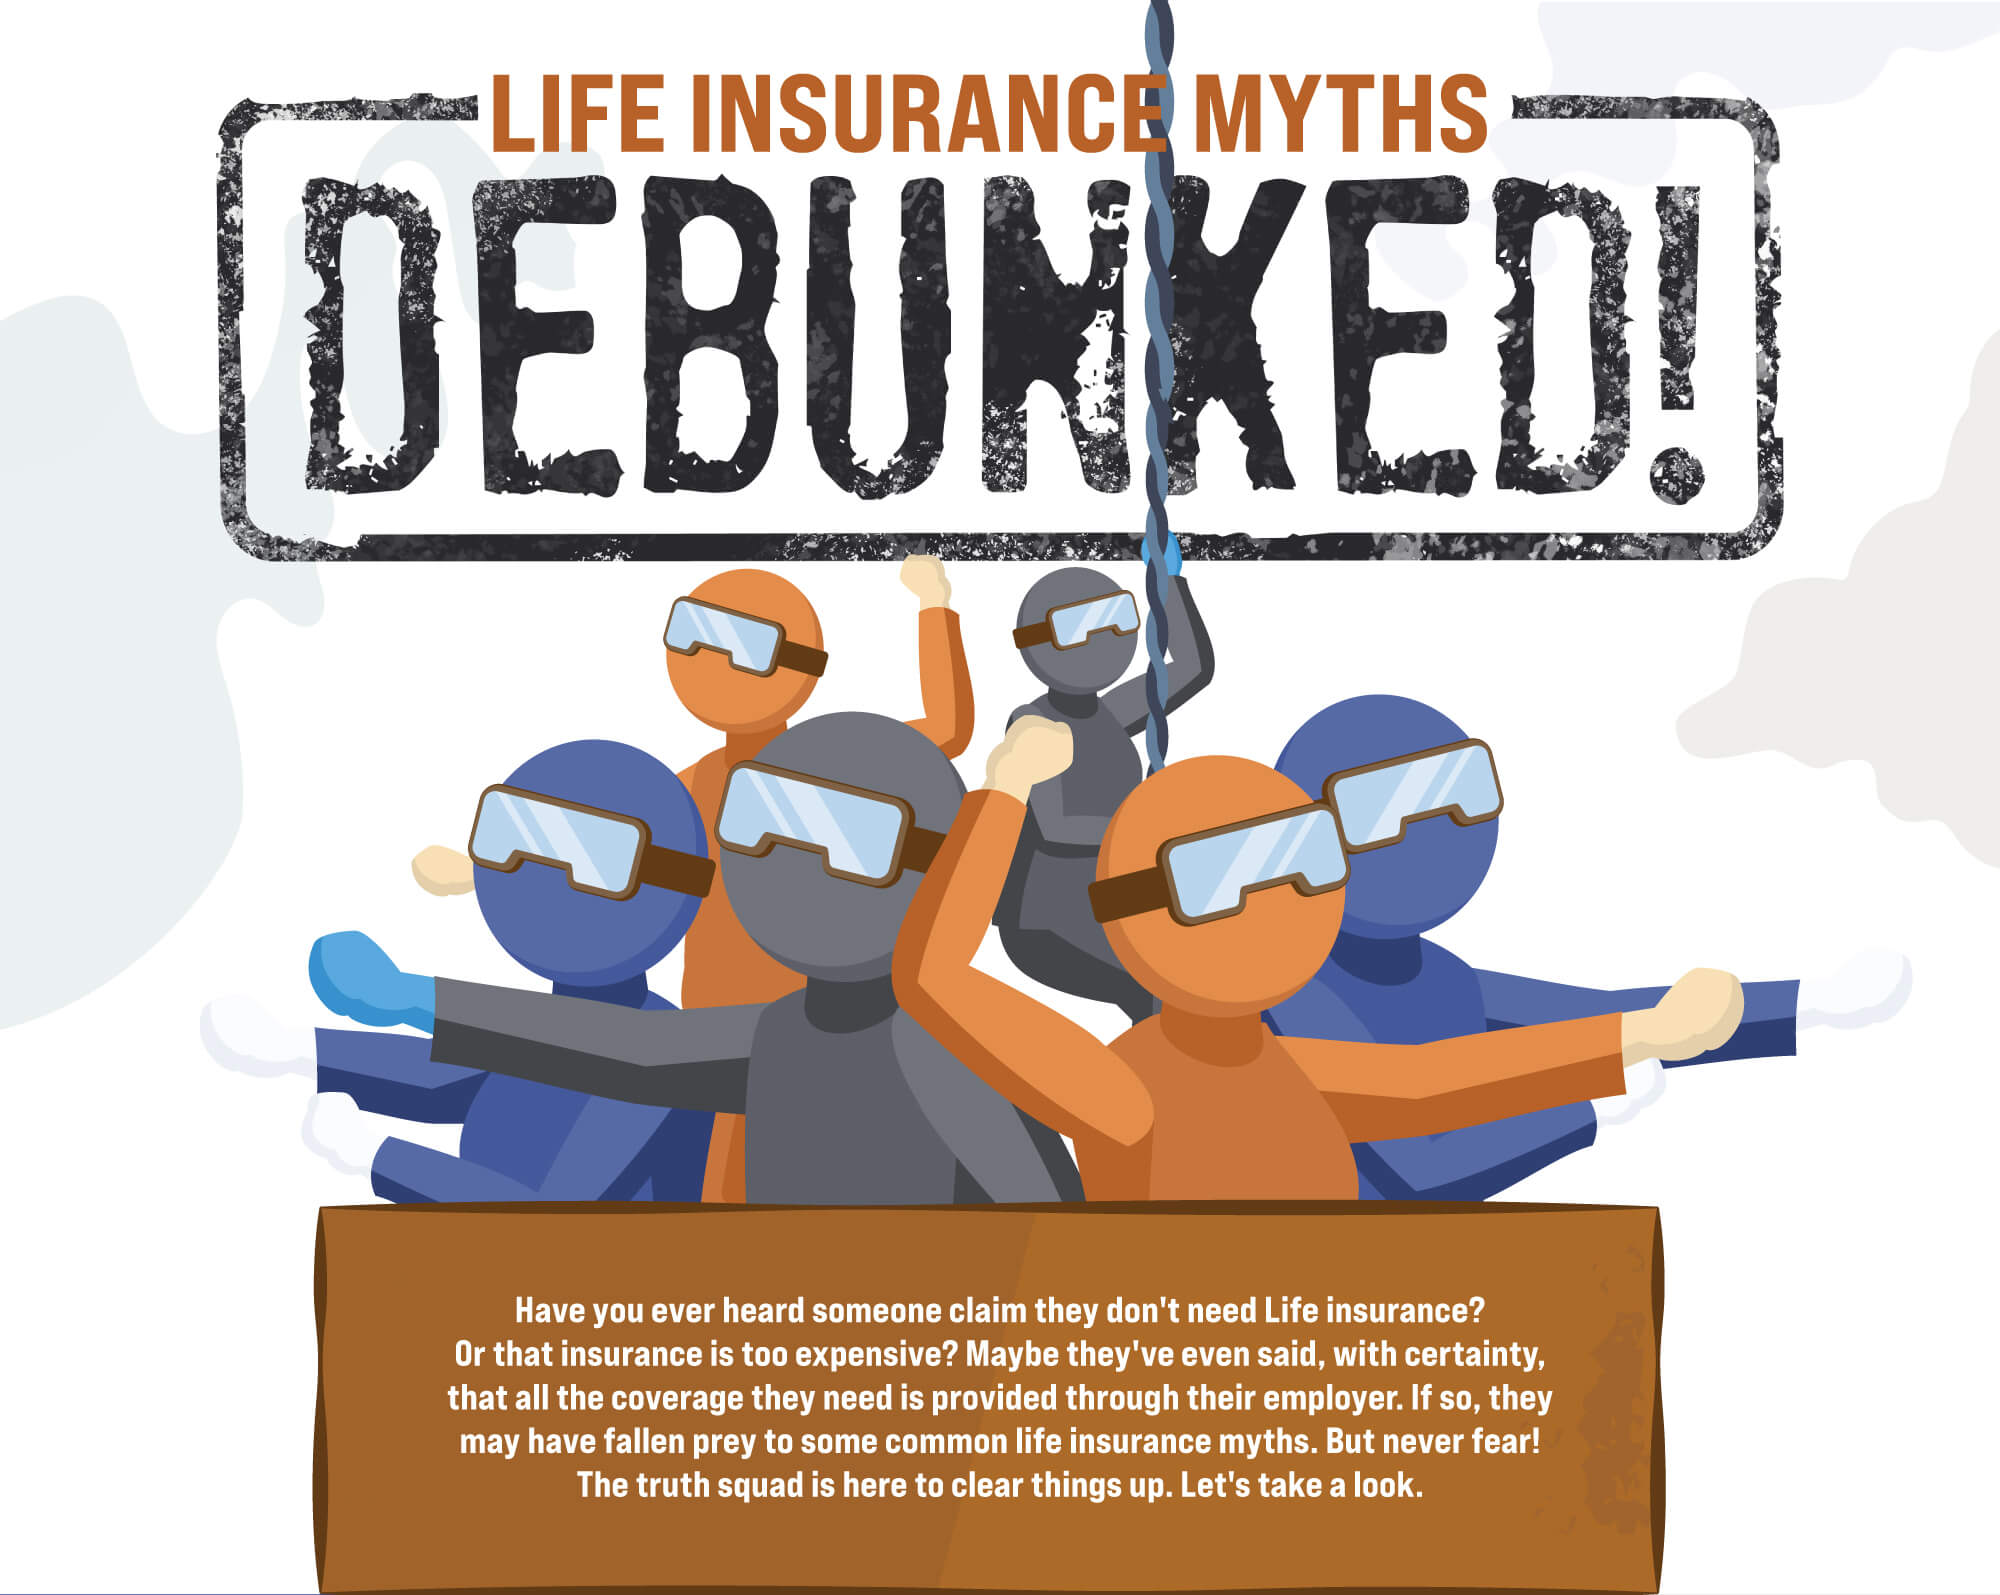 Life Insurance Myths Debunked! Have you ever heard someone claim they don't need Life insurance? Or that insurance is too expensive? Maybe they've even said, with certainty, that all the coverage they need is provided through their employer. If so, they may have fallen prey to some common life insurance myths.